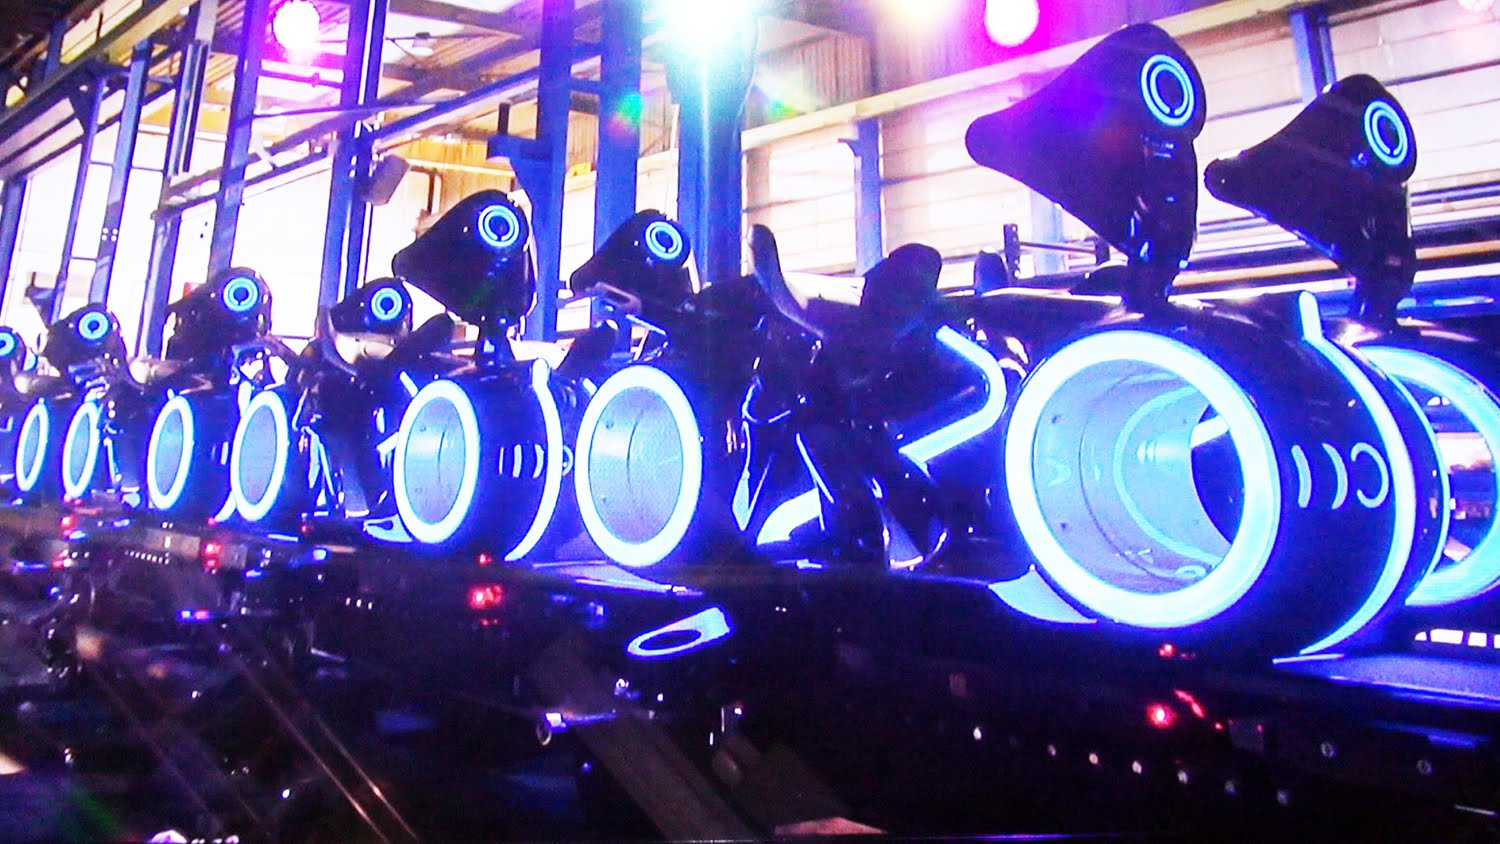 &#039;Tron&#039; Ride Confirmed For Disney World By 2021, Going In